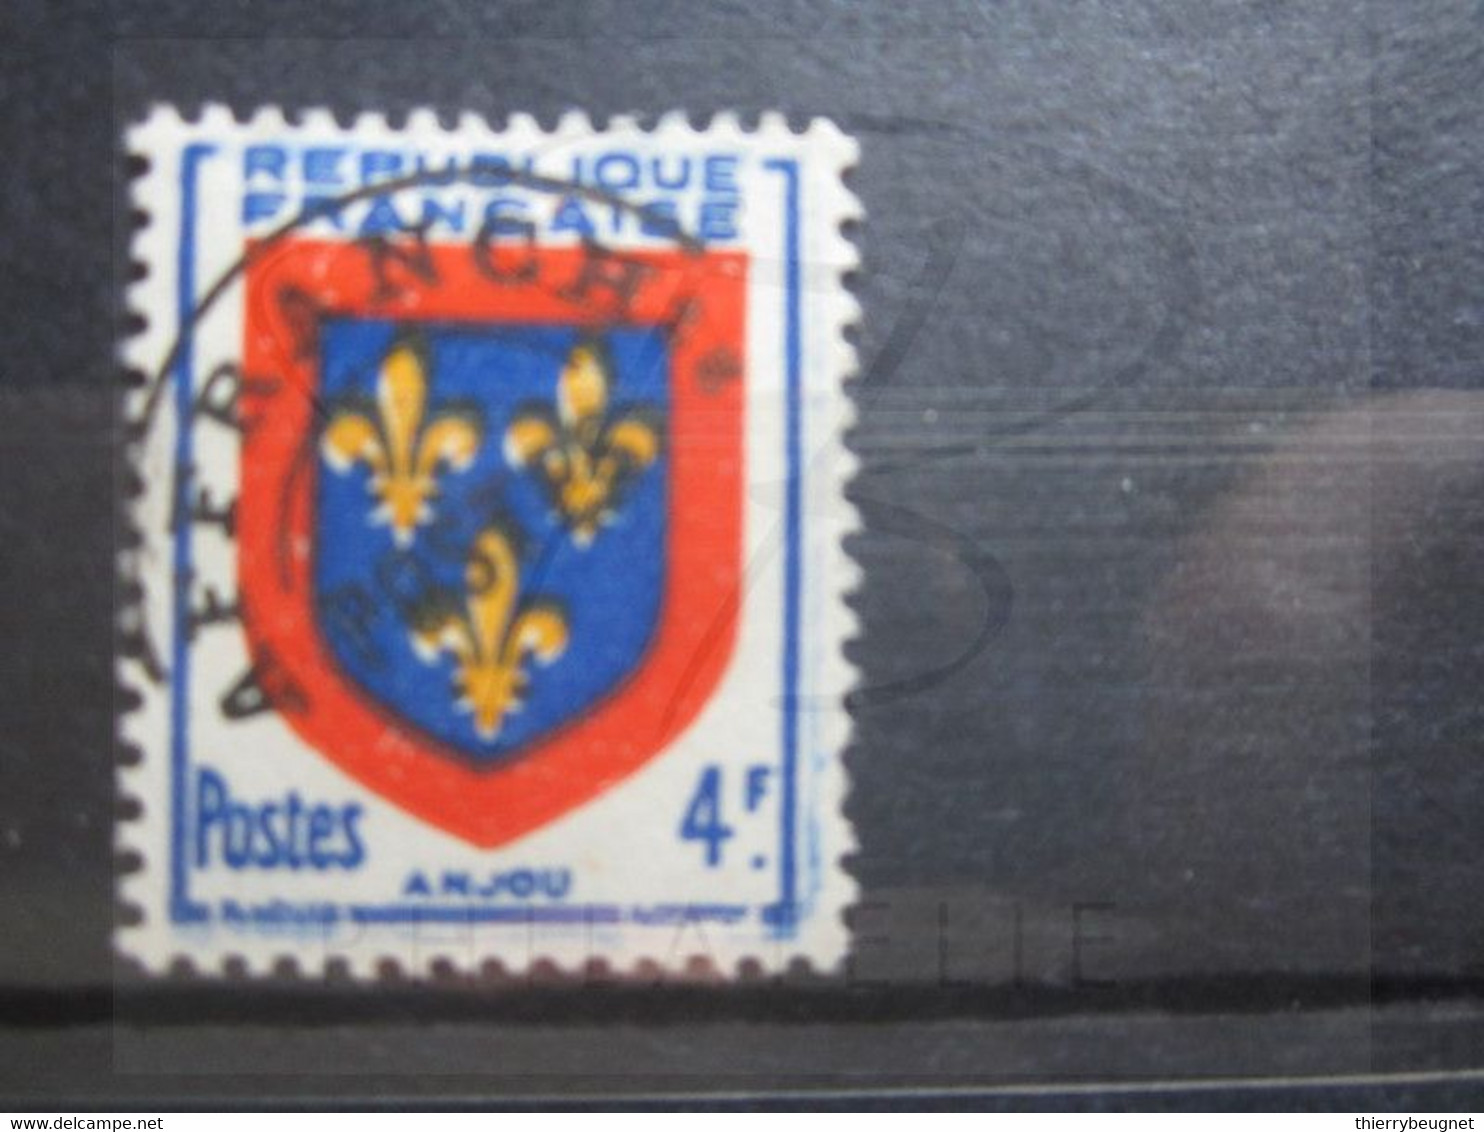 VEND BEAU TIMBRE PREOBLITERE DE FRANCE N° 105 , MACULAGE A DROITE !!! (b) - Used Stamps